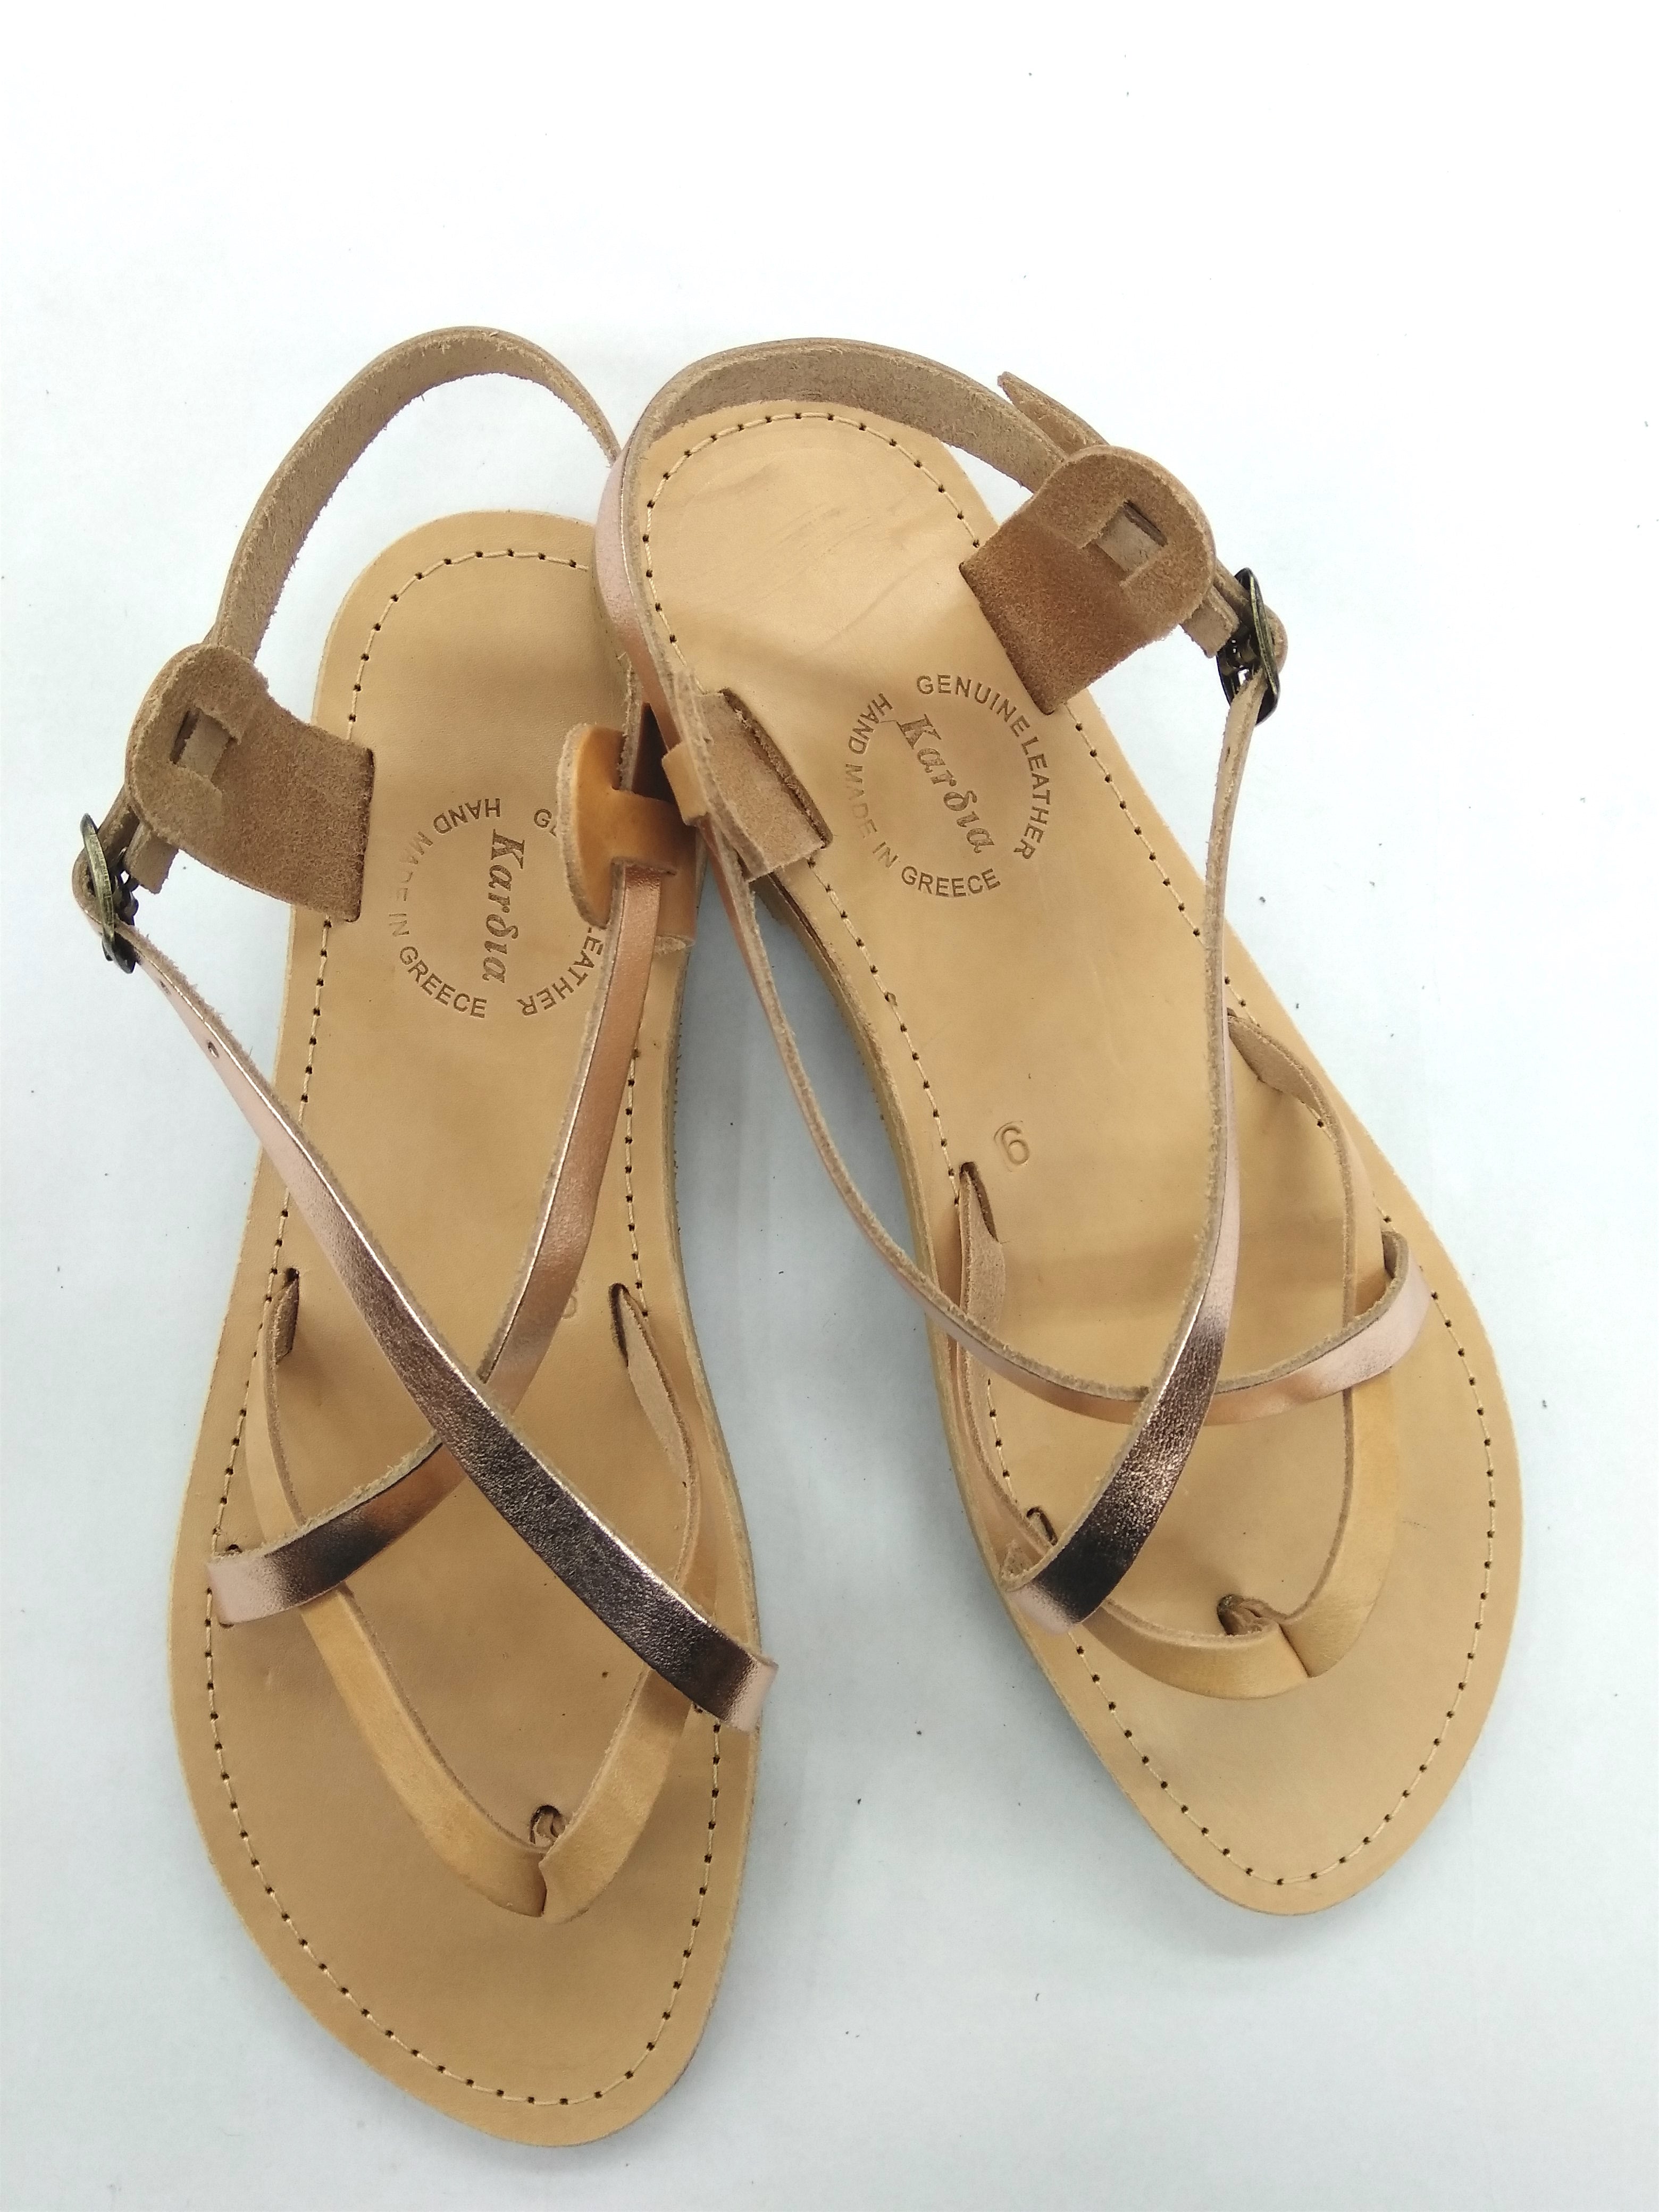 Athena Womens Sandals with Straps in Rose Gold and Natural Leathers - Kardia